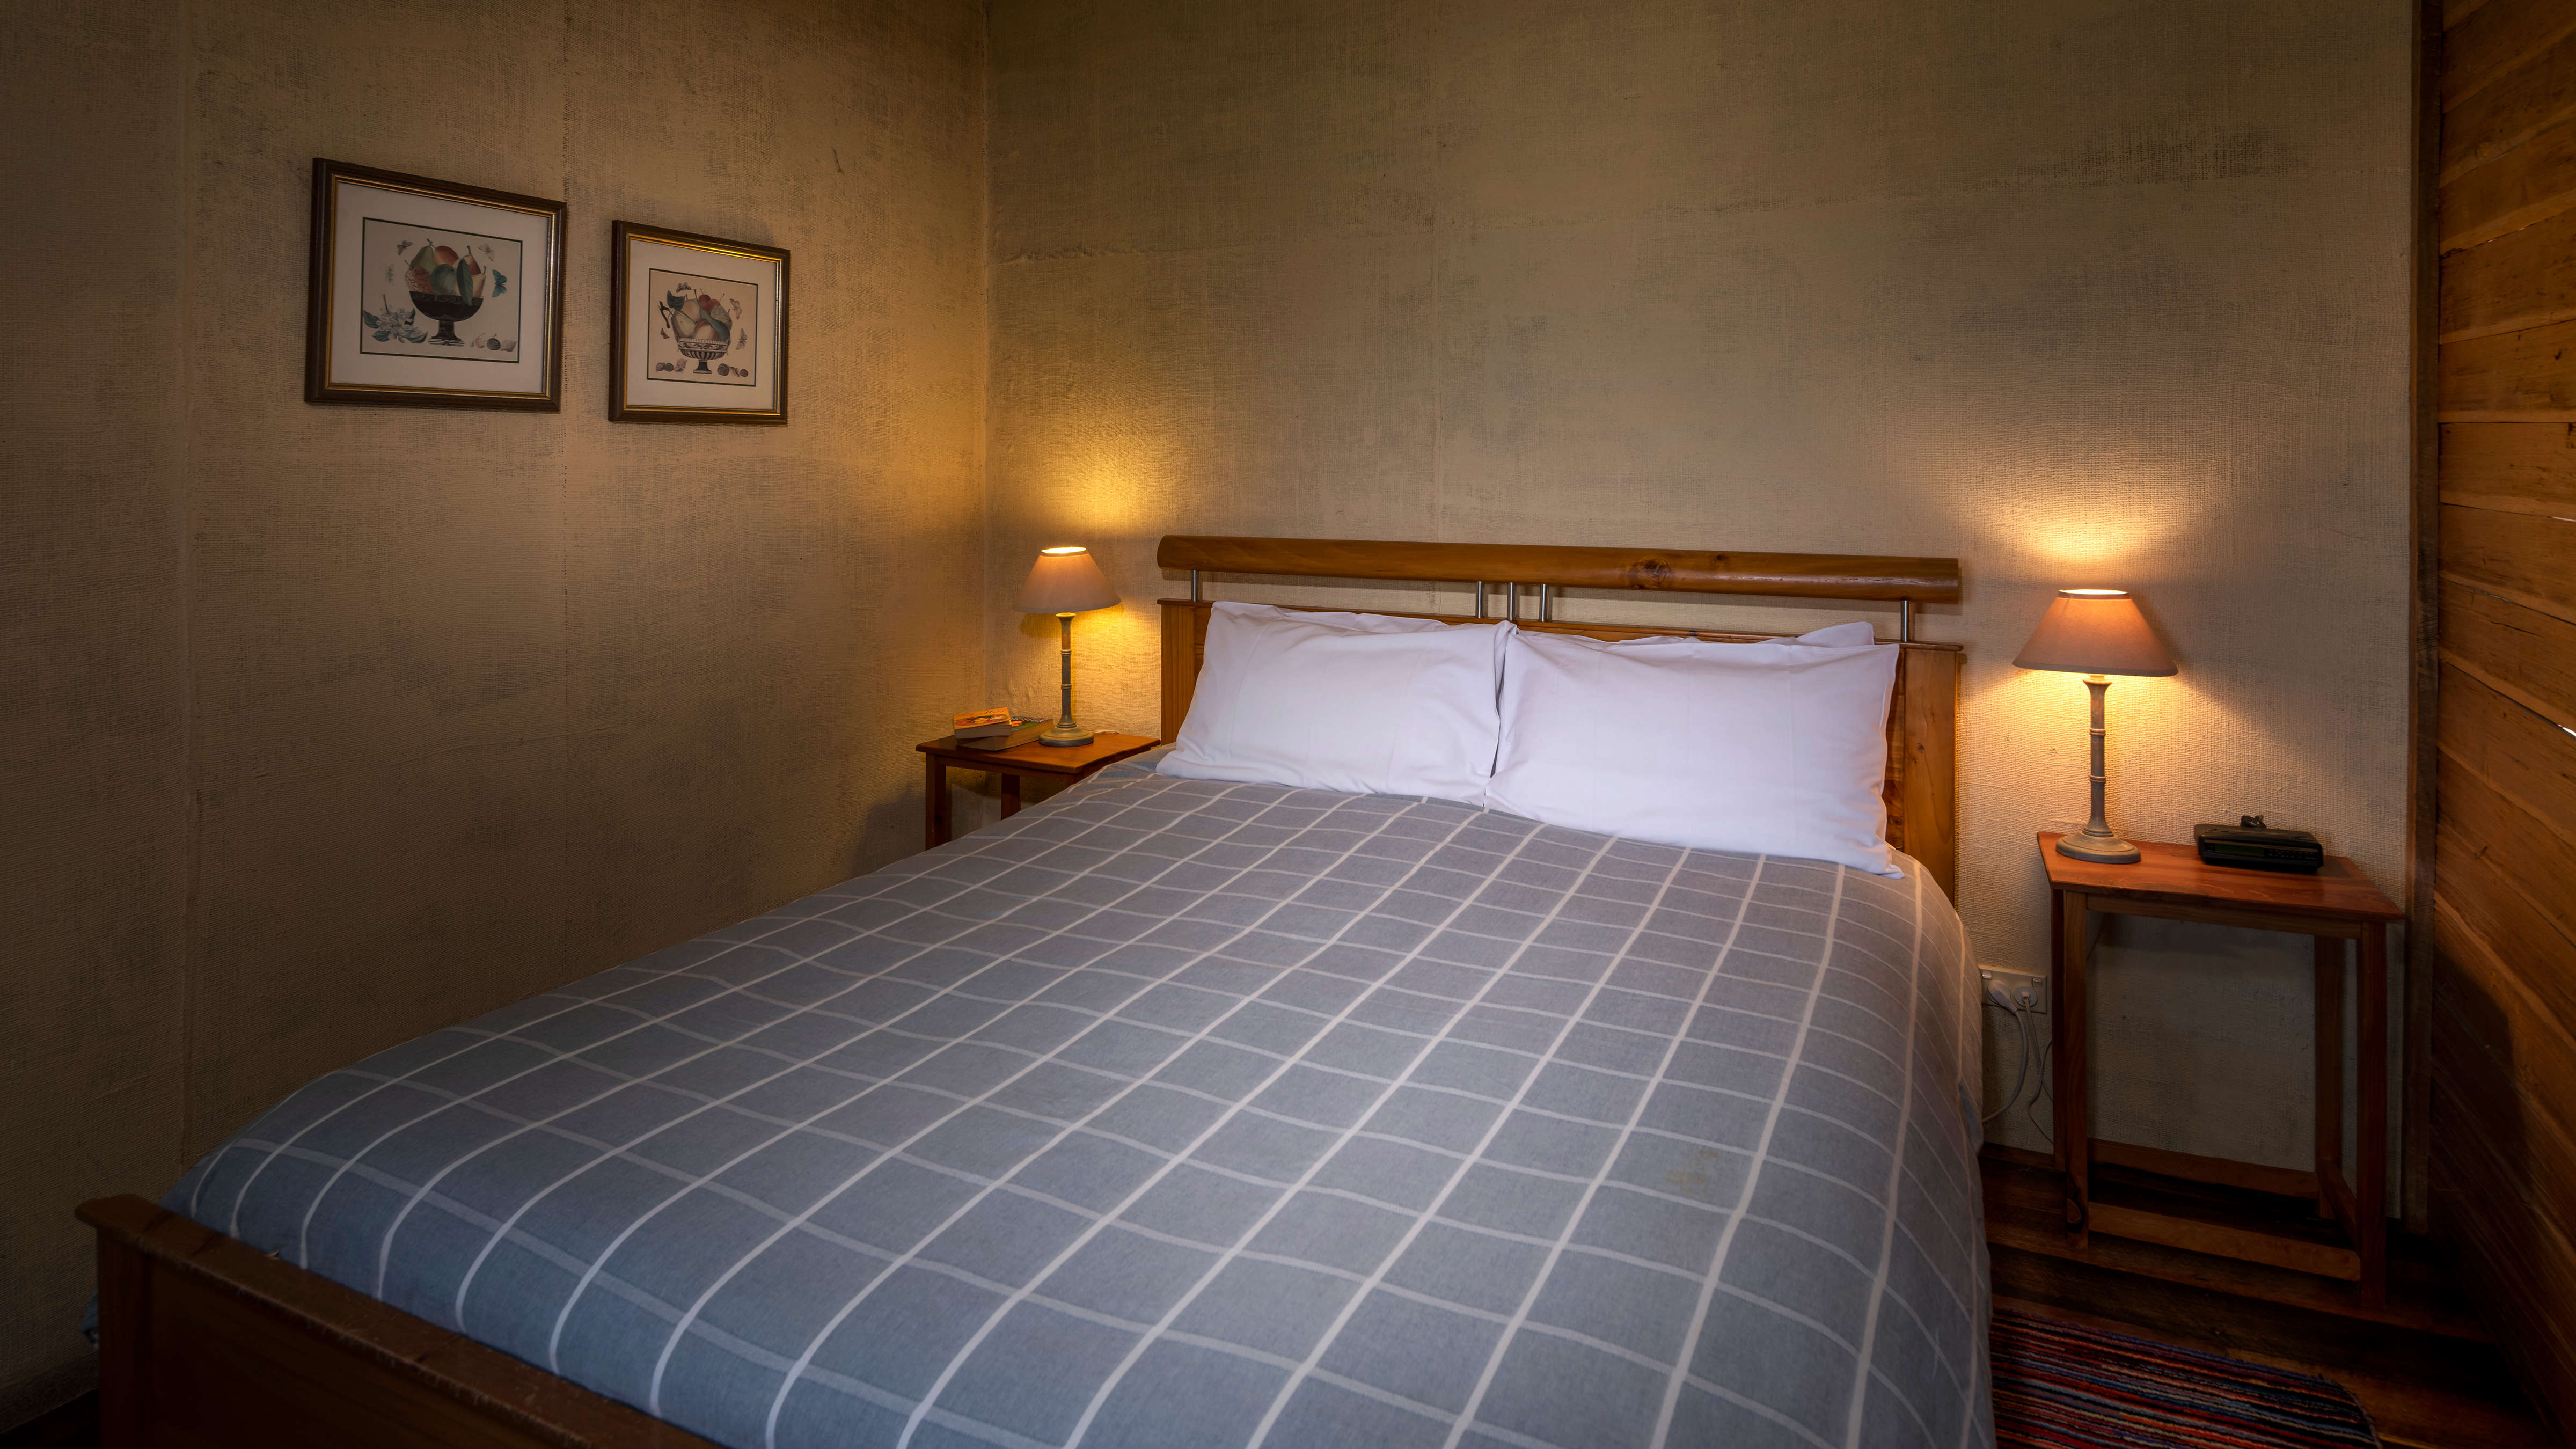 The bedroom walls are covered with painted hessian with two pictures hanging on the wall. The wall to the right hand side is timber horizontal palings. The timber framed bed in the centre has a blue and white checked quilt with white pillows. Timber bedside tables have bedside lights which are turned on. Photo: Rob Burnett.